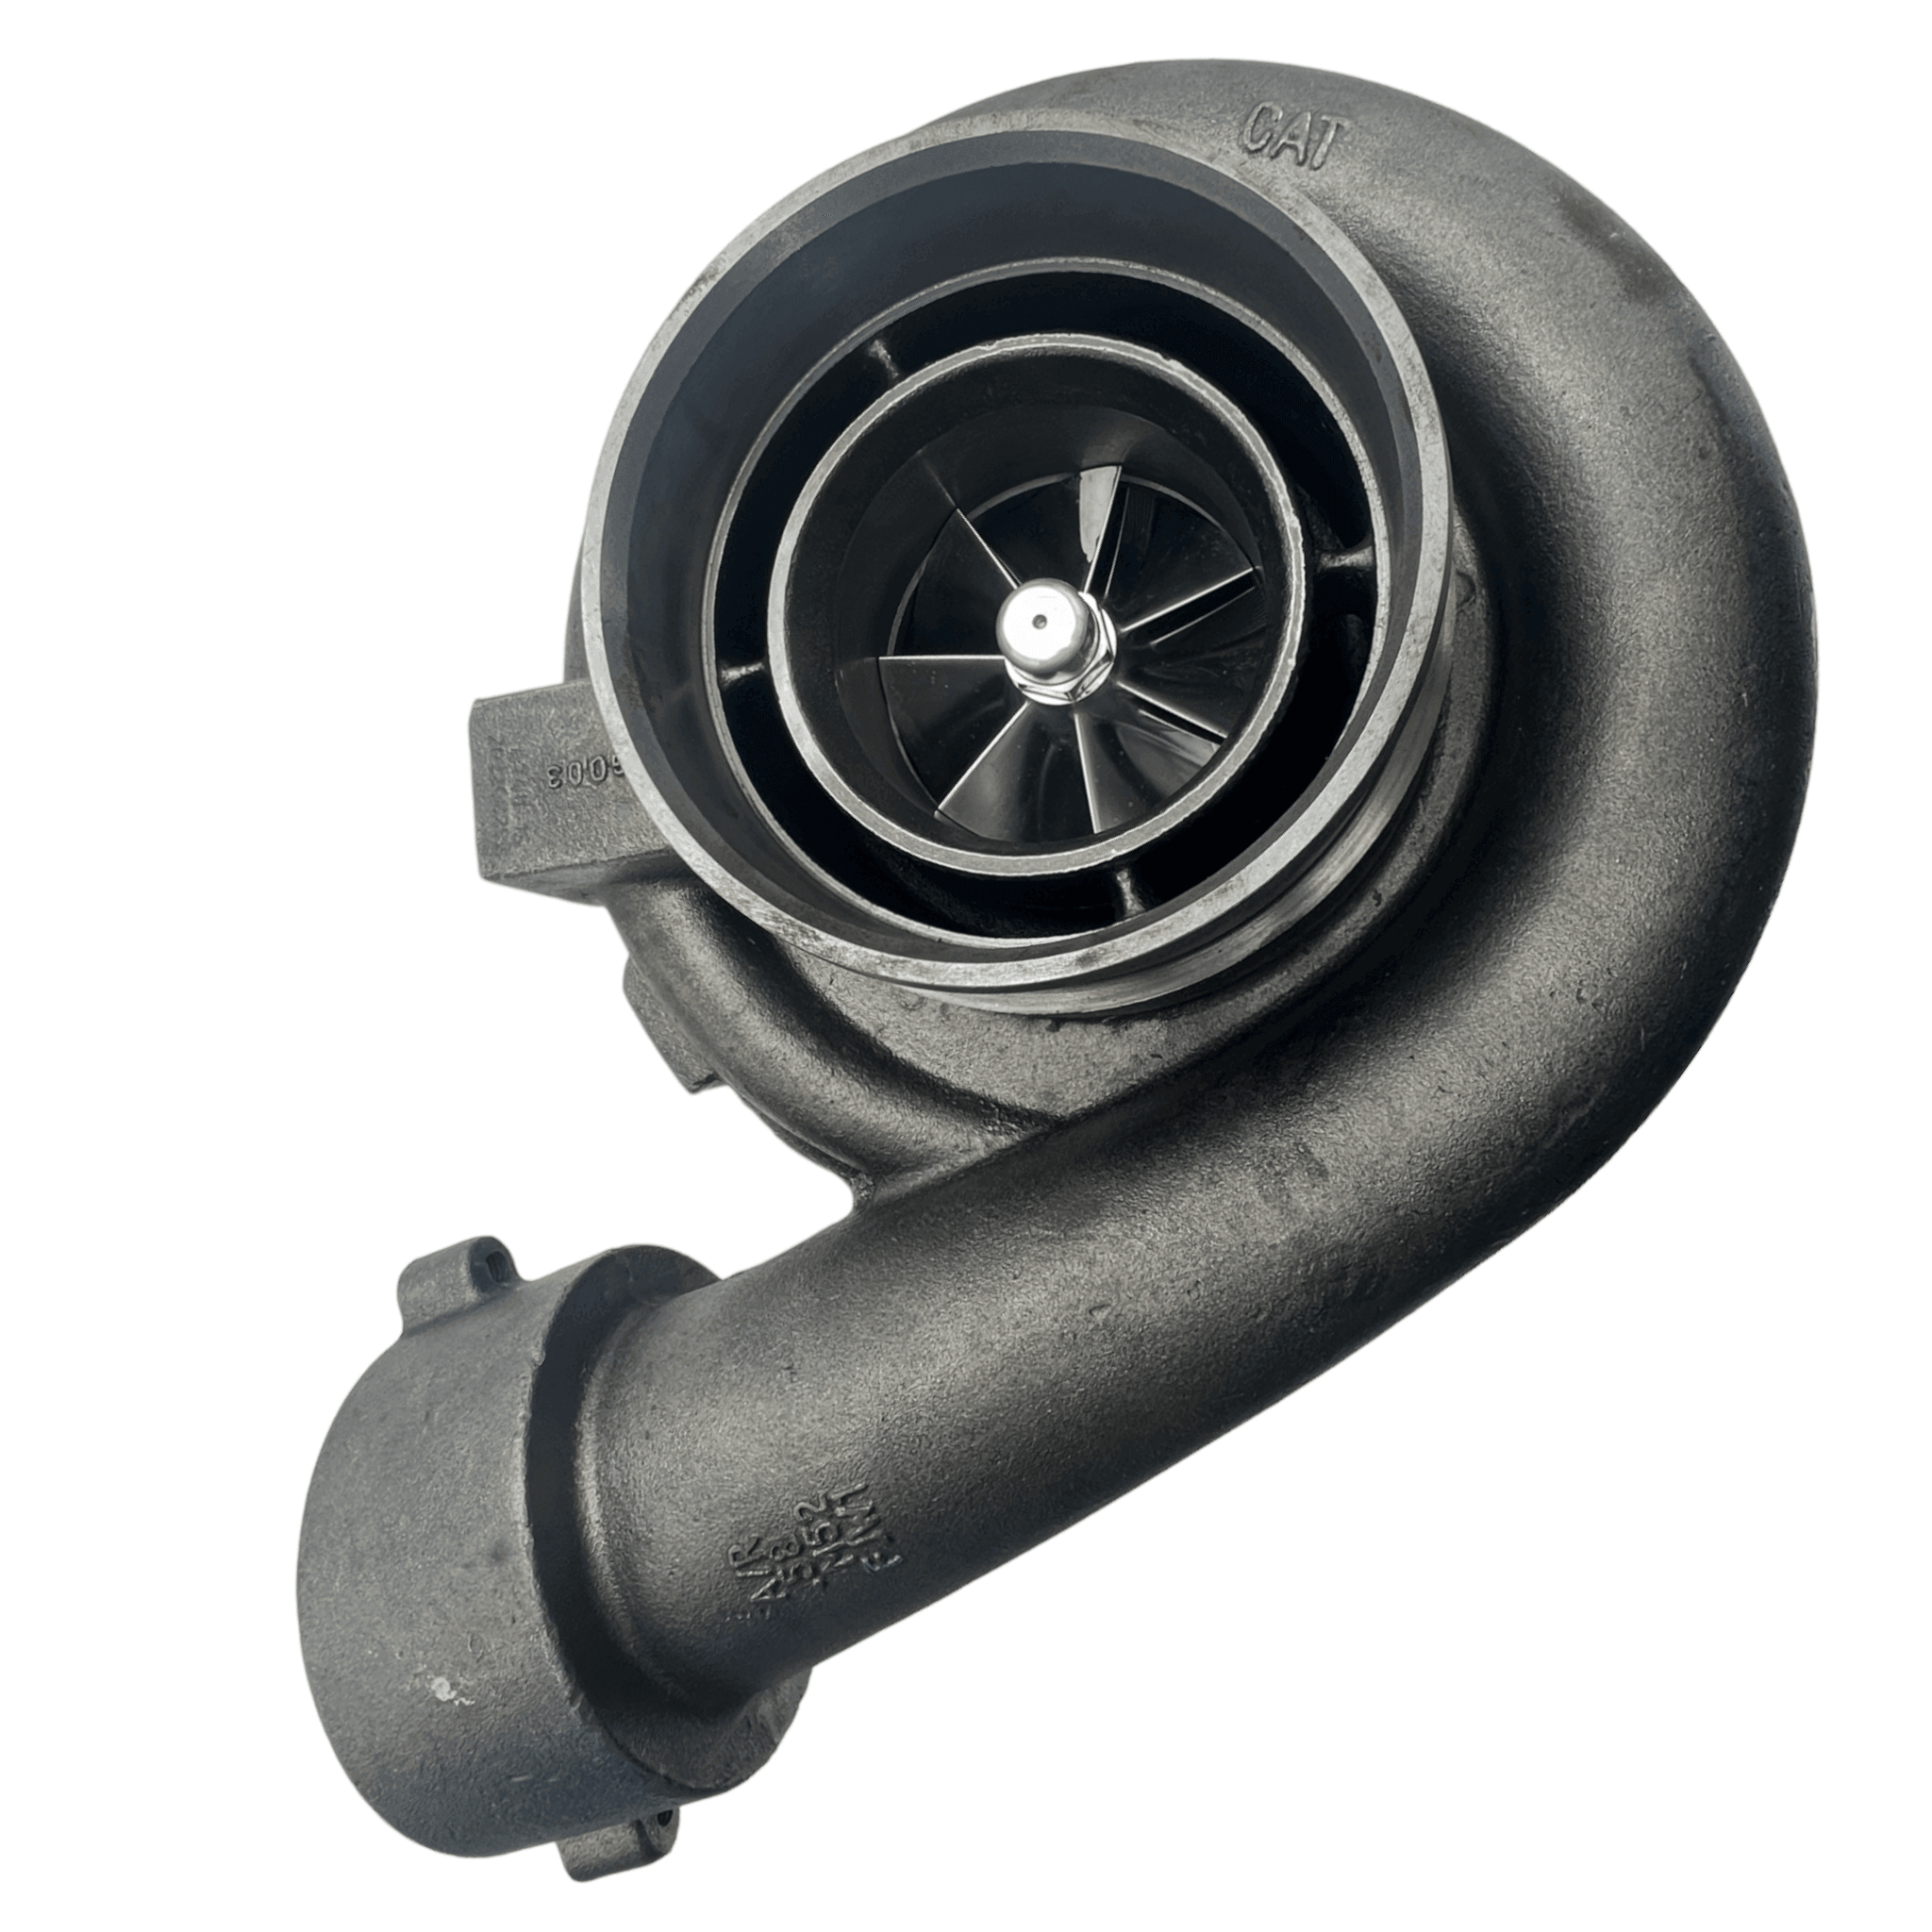 3930358 Genuine Cat Turbocharger For Caterpillar G3508/ G3516 Engines - ADVANCED TRUCK PARTS